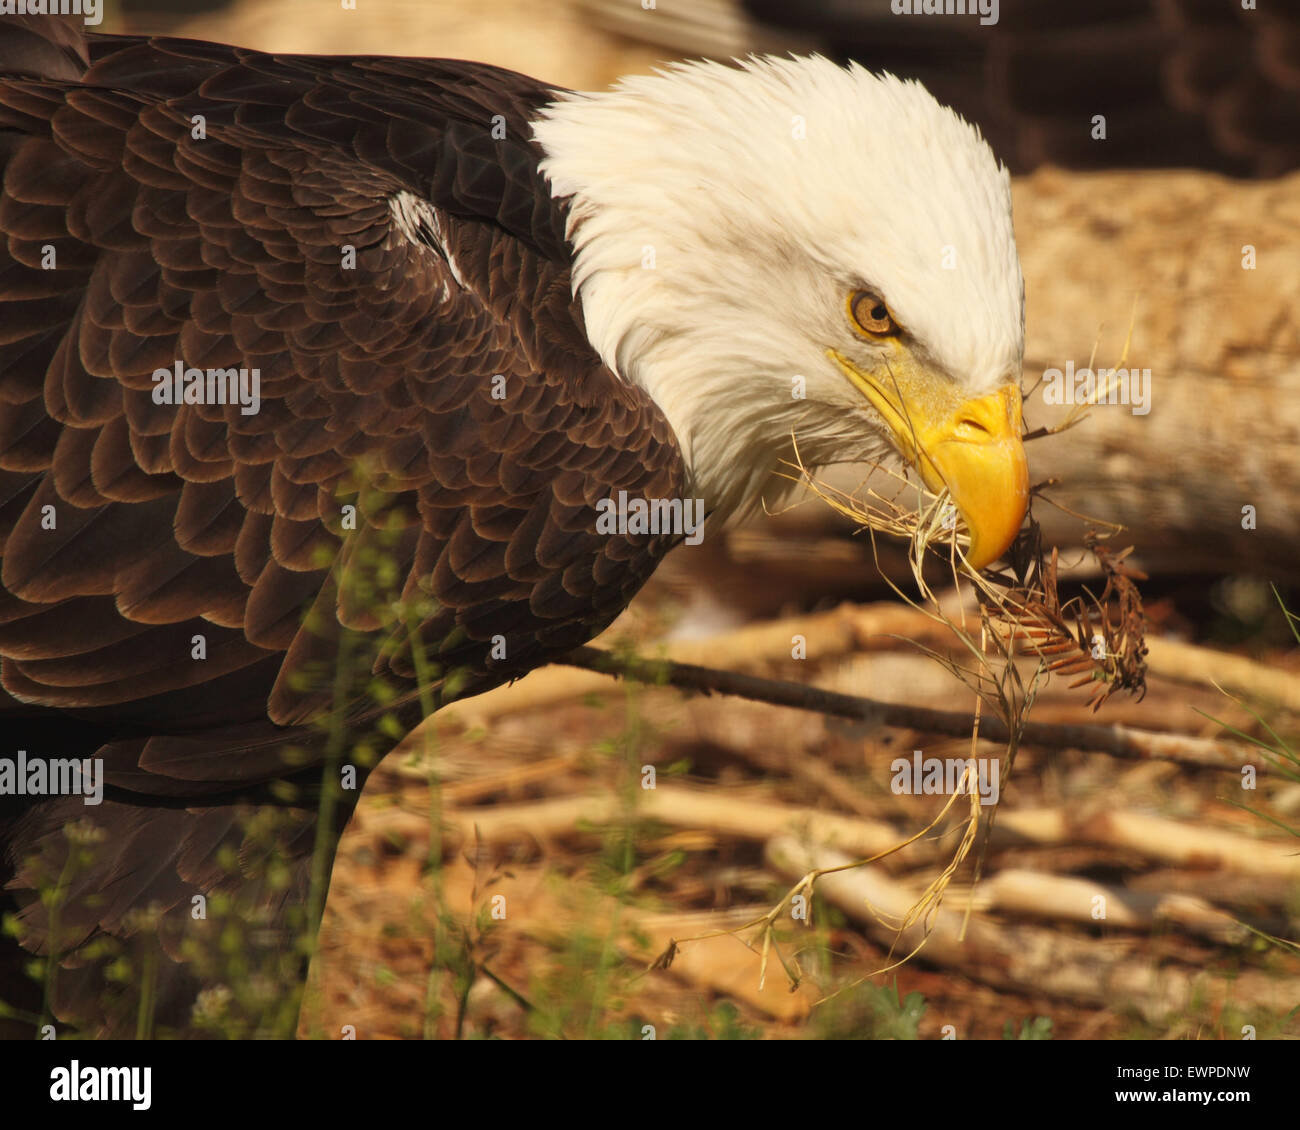 A Bald Eagle with nesting material in its mouth. Stock Photo